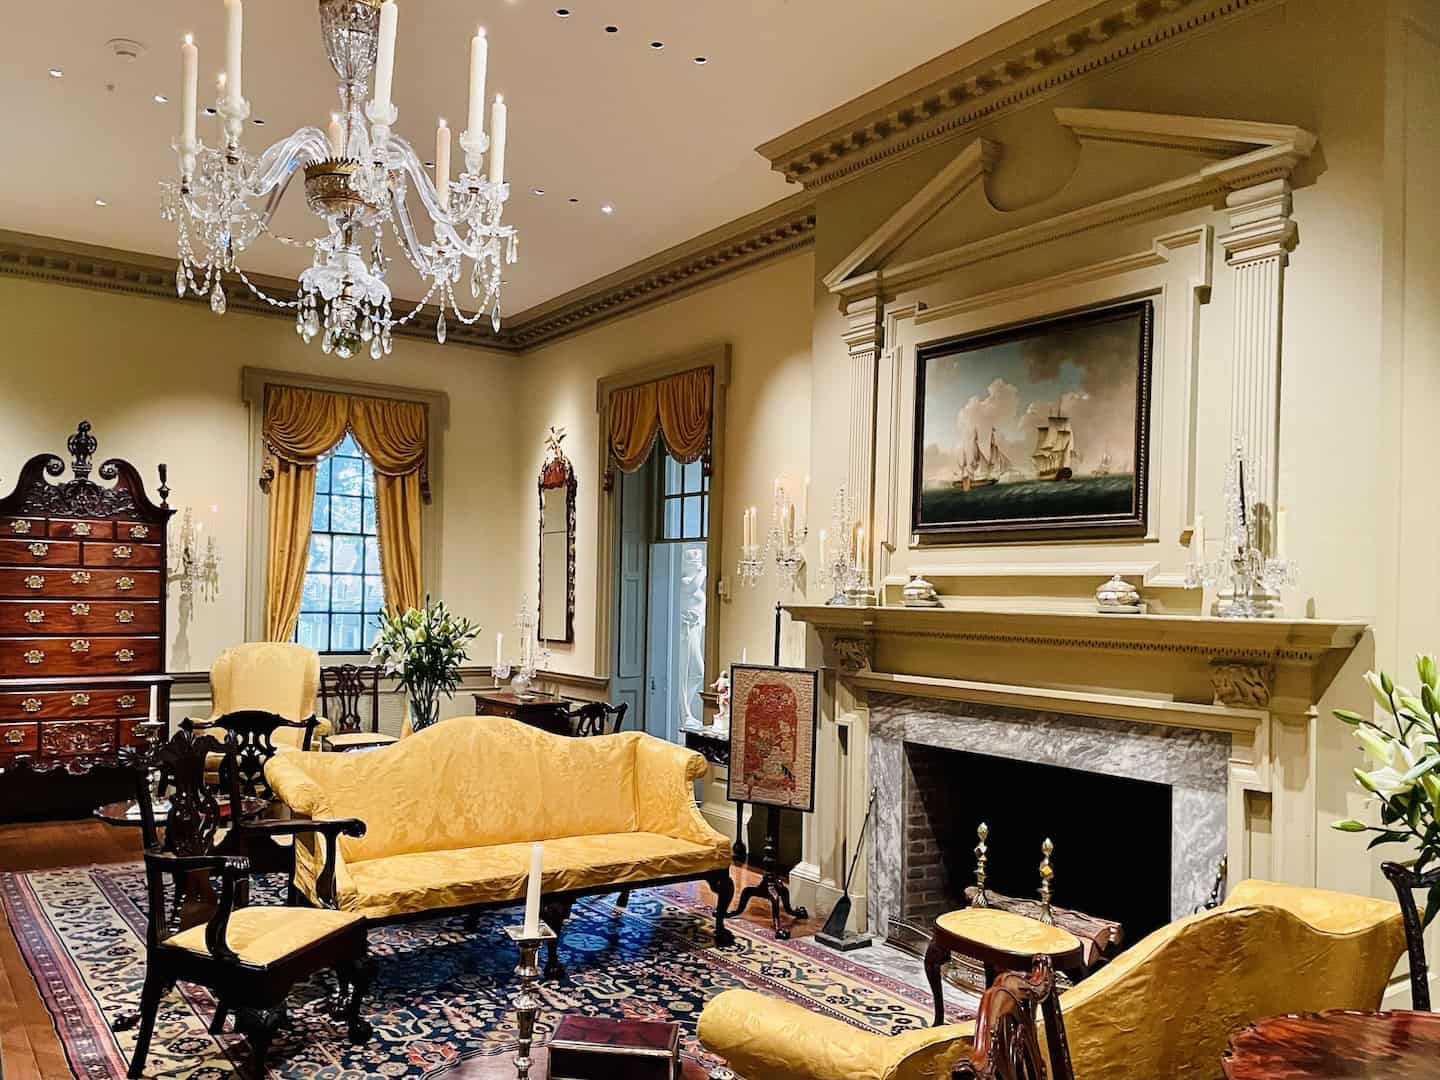 Formal Queen Anne furniture is placed on an oriental carpet under a glass chandelier in a painted paneled room with a fireplace.